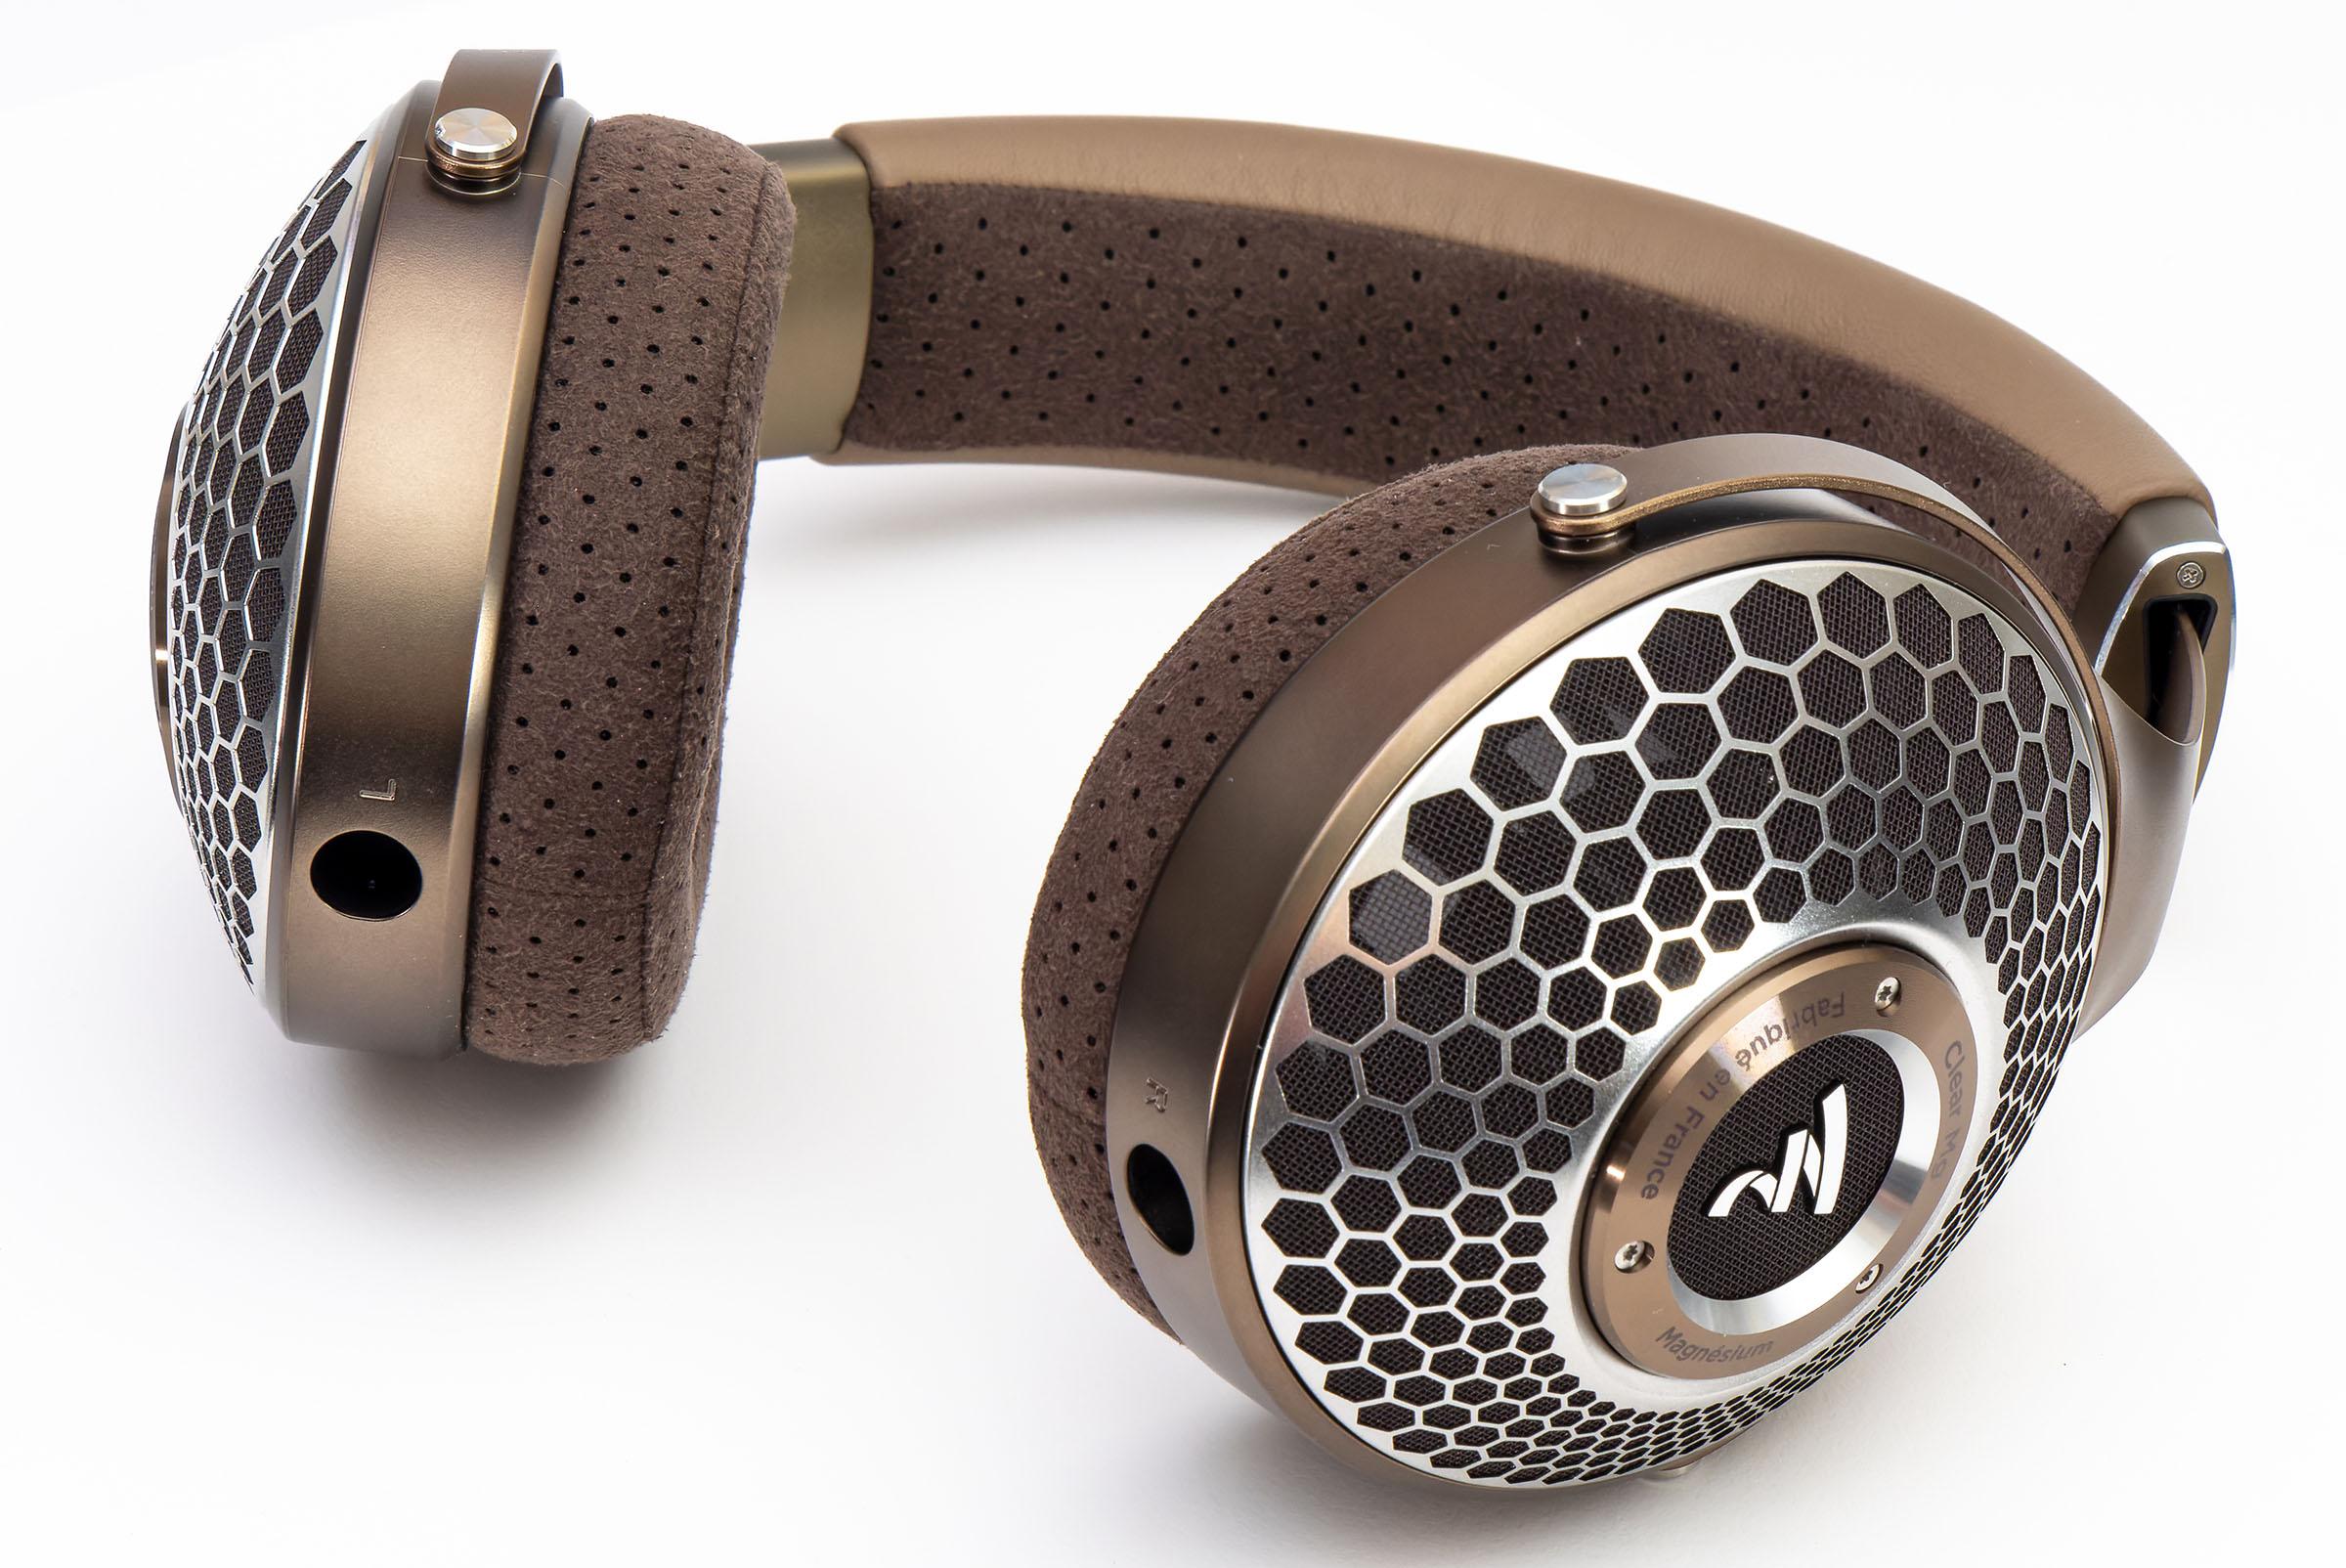 These are beautiful headphones that make the most of just about any source, from a smartphone to a dedicated high-end integrated DAC/amp like Naim's Uniti Atom Headphone Edition.